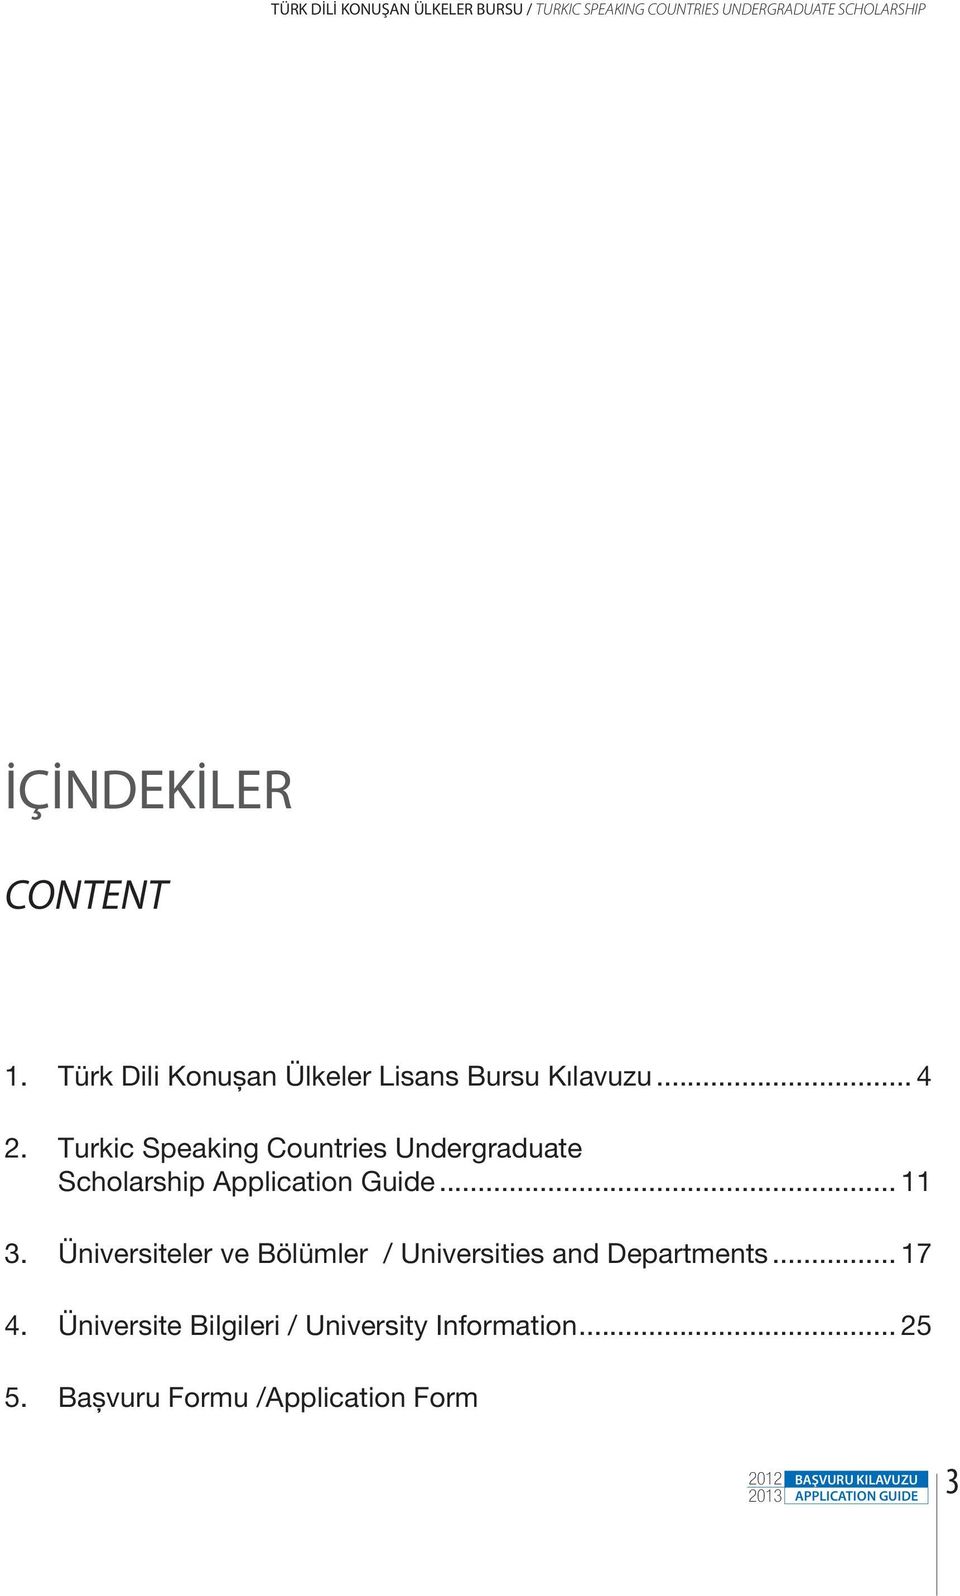 Turkic Speaking Countries Undergraduate Scholarship Application Guide... 11 3.